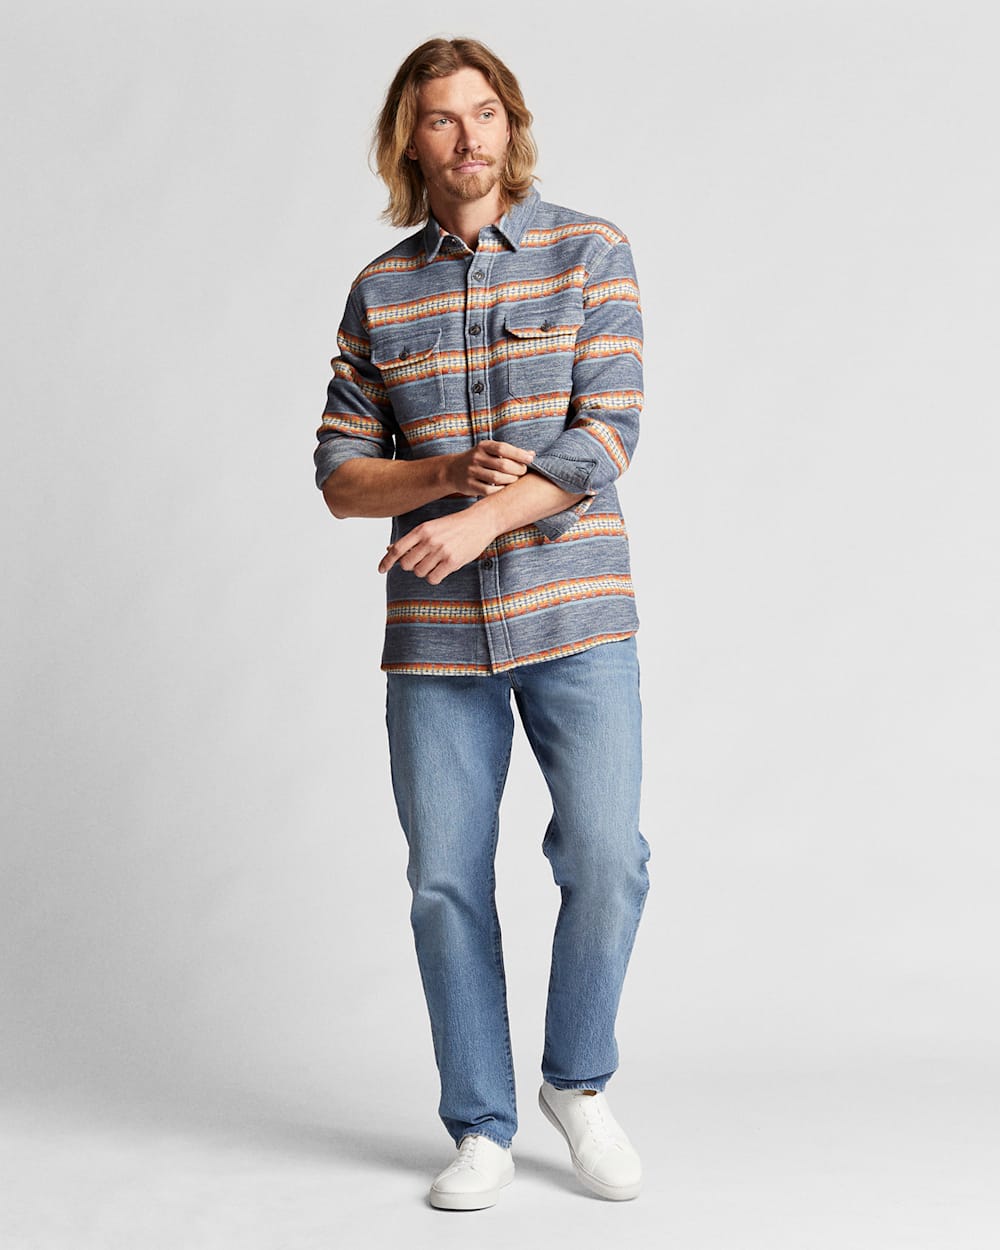 MEN'S DOUBLESOFT DRIFTWOOD SHIRT IN BLUE PINTO MOUNTAINS image number 1